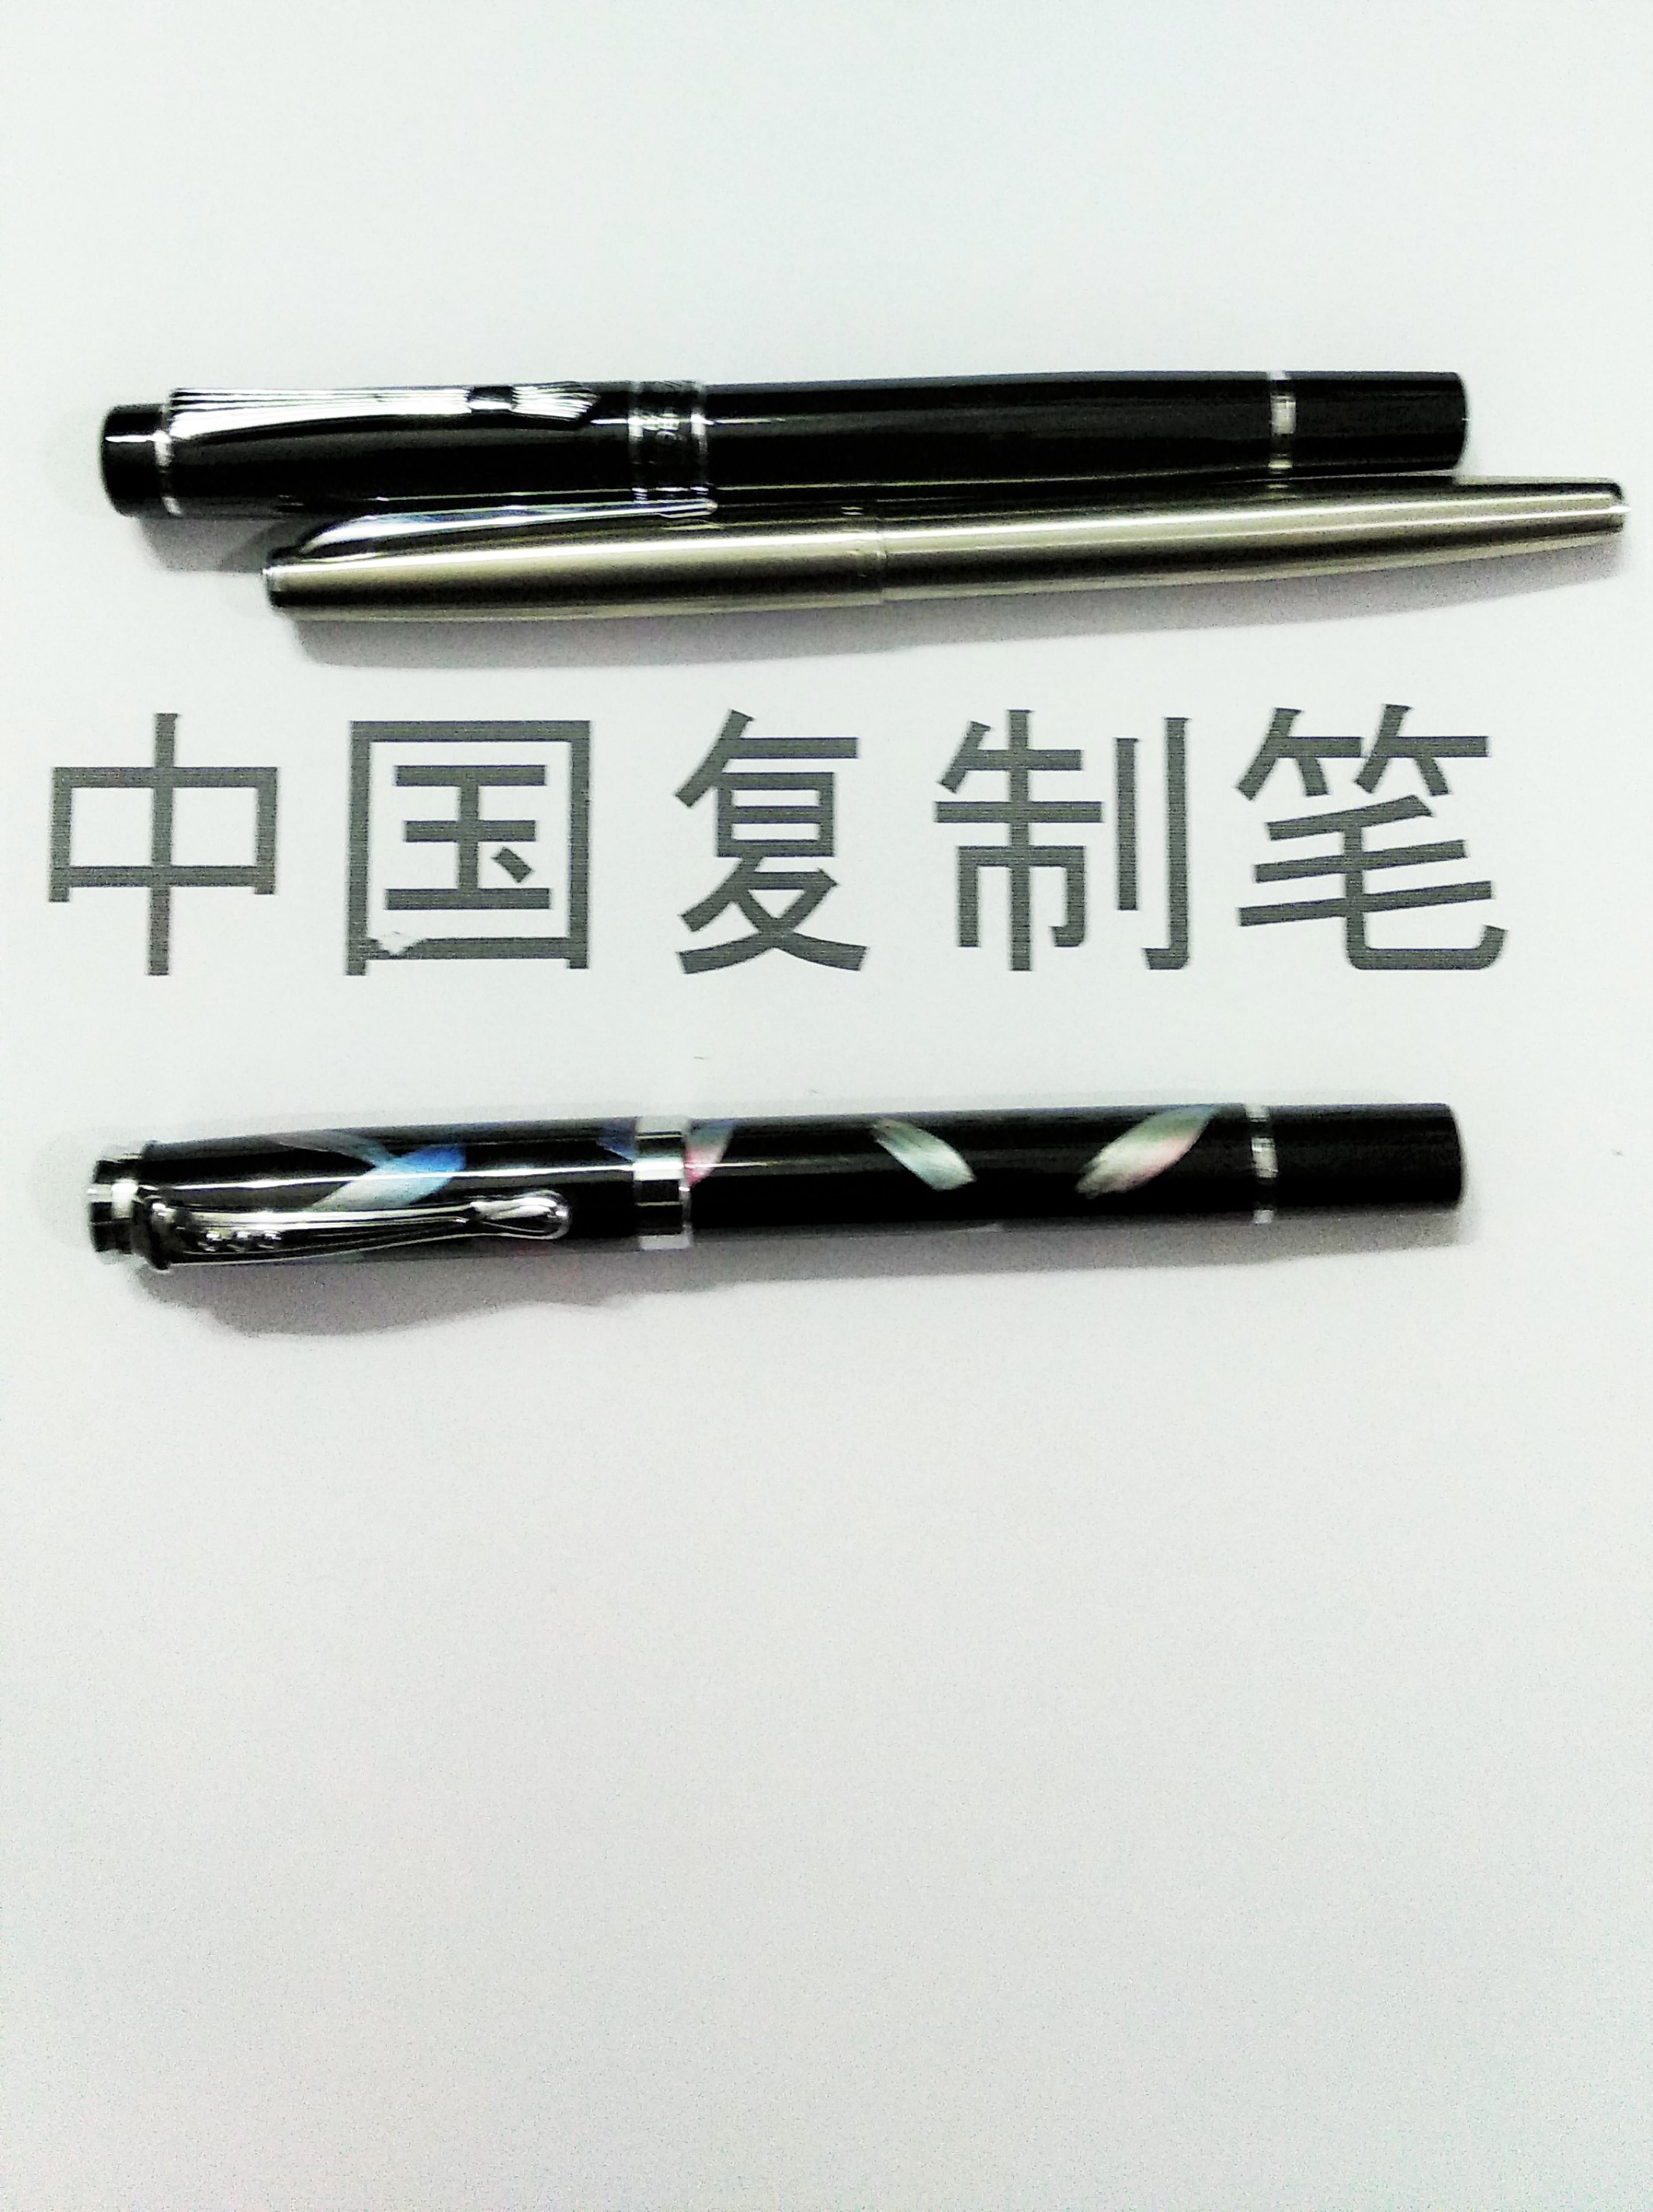 Those Chinese Fountain Pens